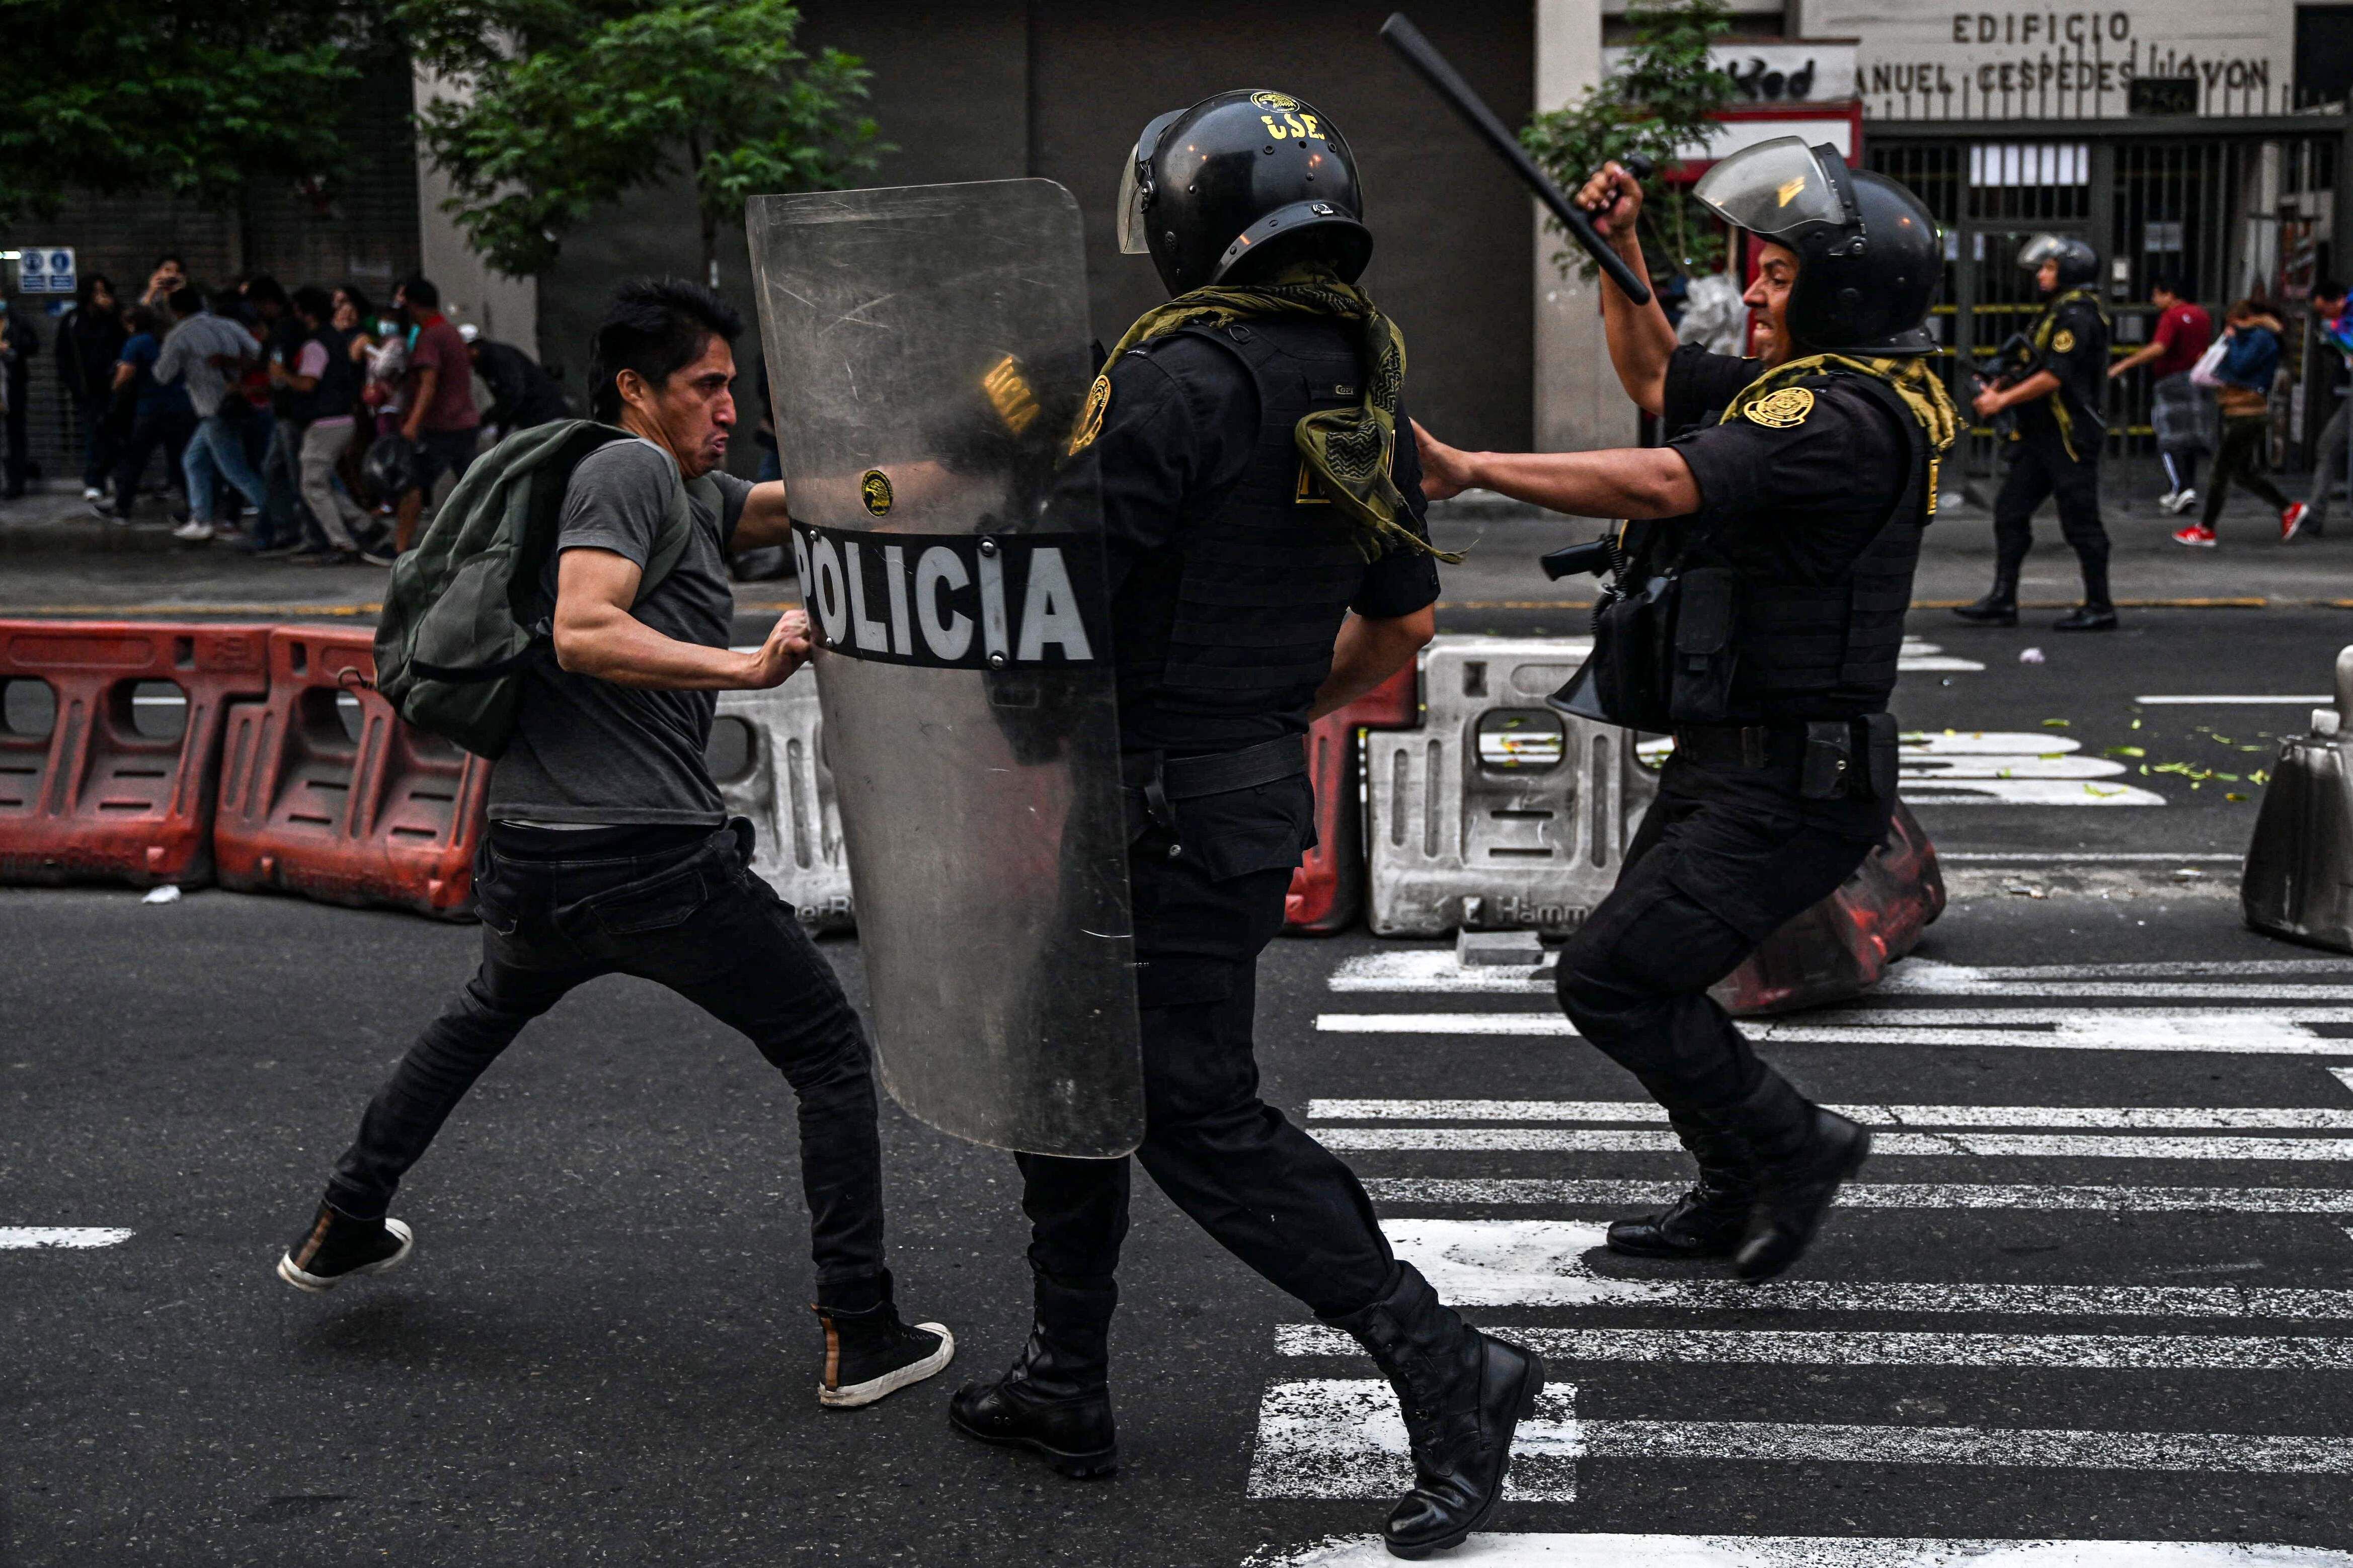 TOPSHOT - A man clashes with riot police during a demonstration demanding the release of ex-President Pedro Castillo and the closure of the Peruvian Congress, in Lima, on December 8, 2022, a day after Castillo's impeachment. - Castillo was replaced by his deputy on the eve, in a dizzying series of events in the country that has long been prone to political upheaval. Peru has had six presidents in six years in a headspinning political environment where governments topple like dominos, many dogged by corruption scandals in a country with a massive gulf between rich and poor. (Photo by Ernesto BENAVIDES / AFP)